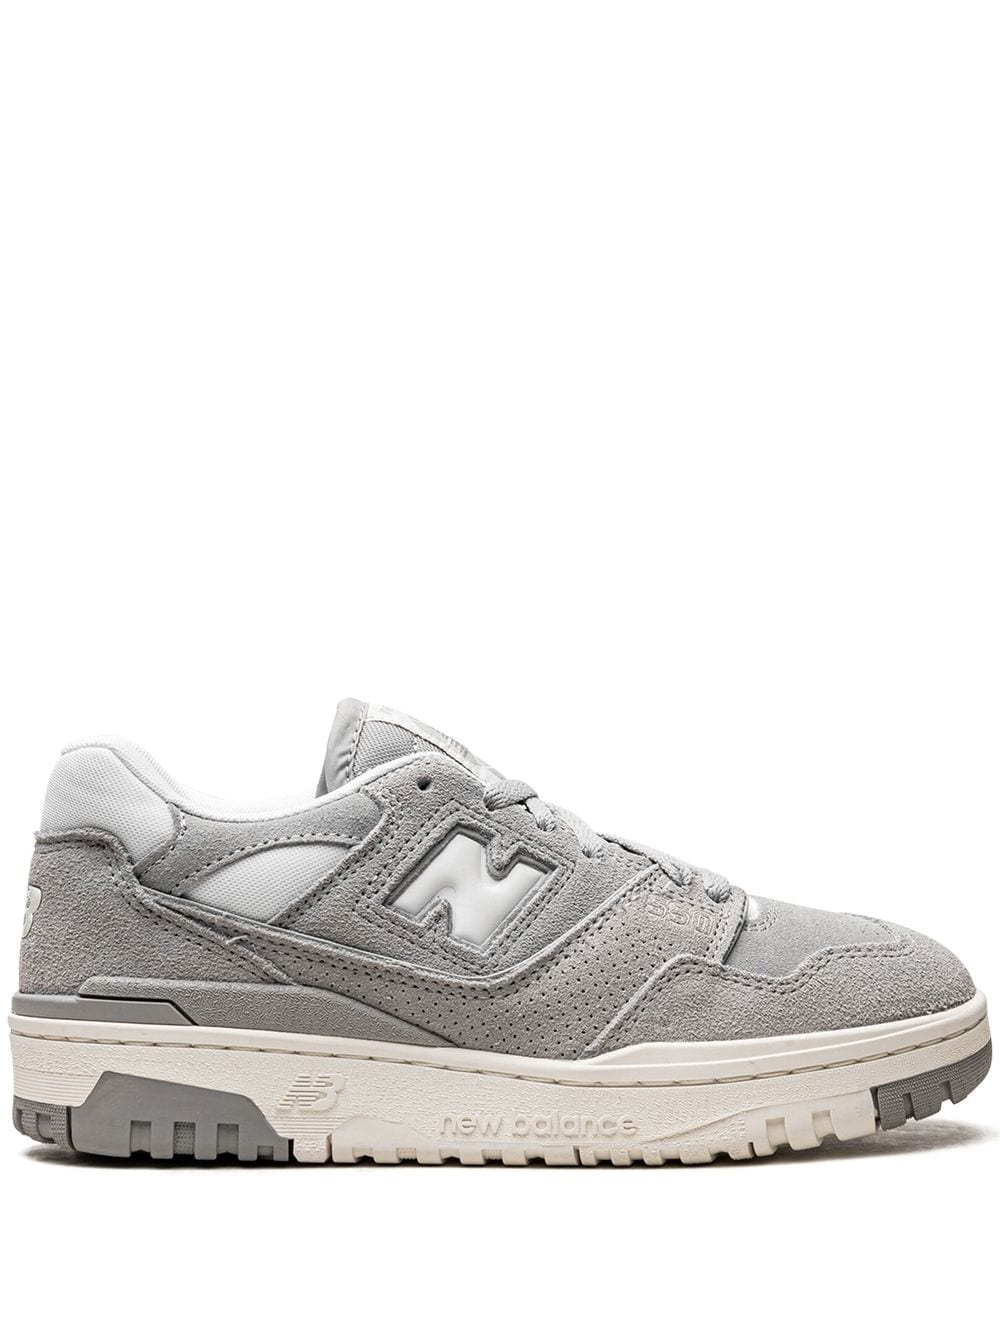 New Balance 550 suede sneakers - Grey